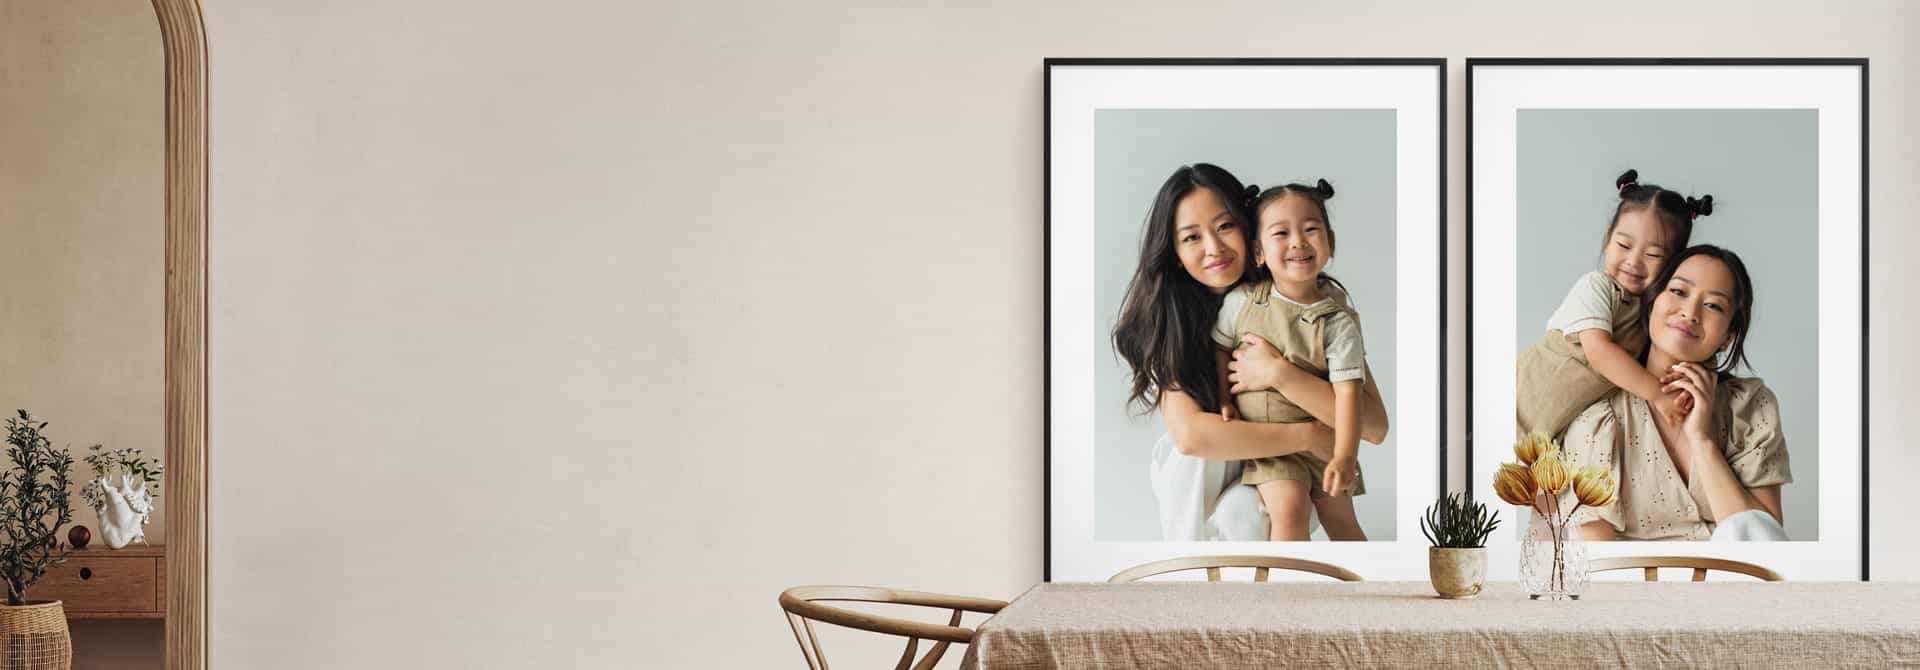 BIGS. Big photo frames, ultralight, super stylish and very low price!